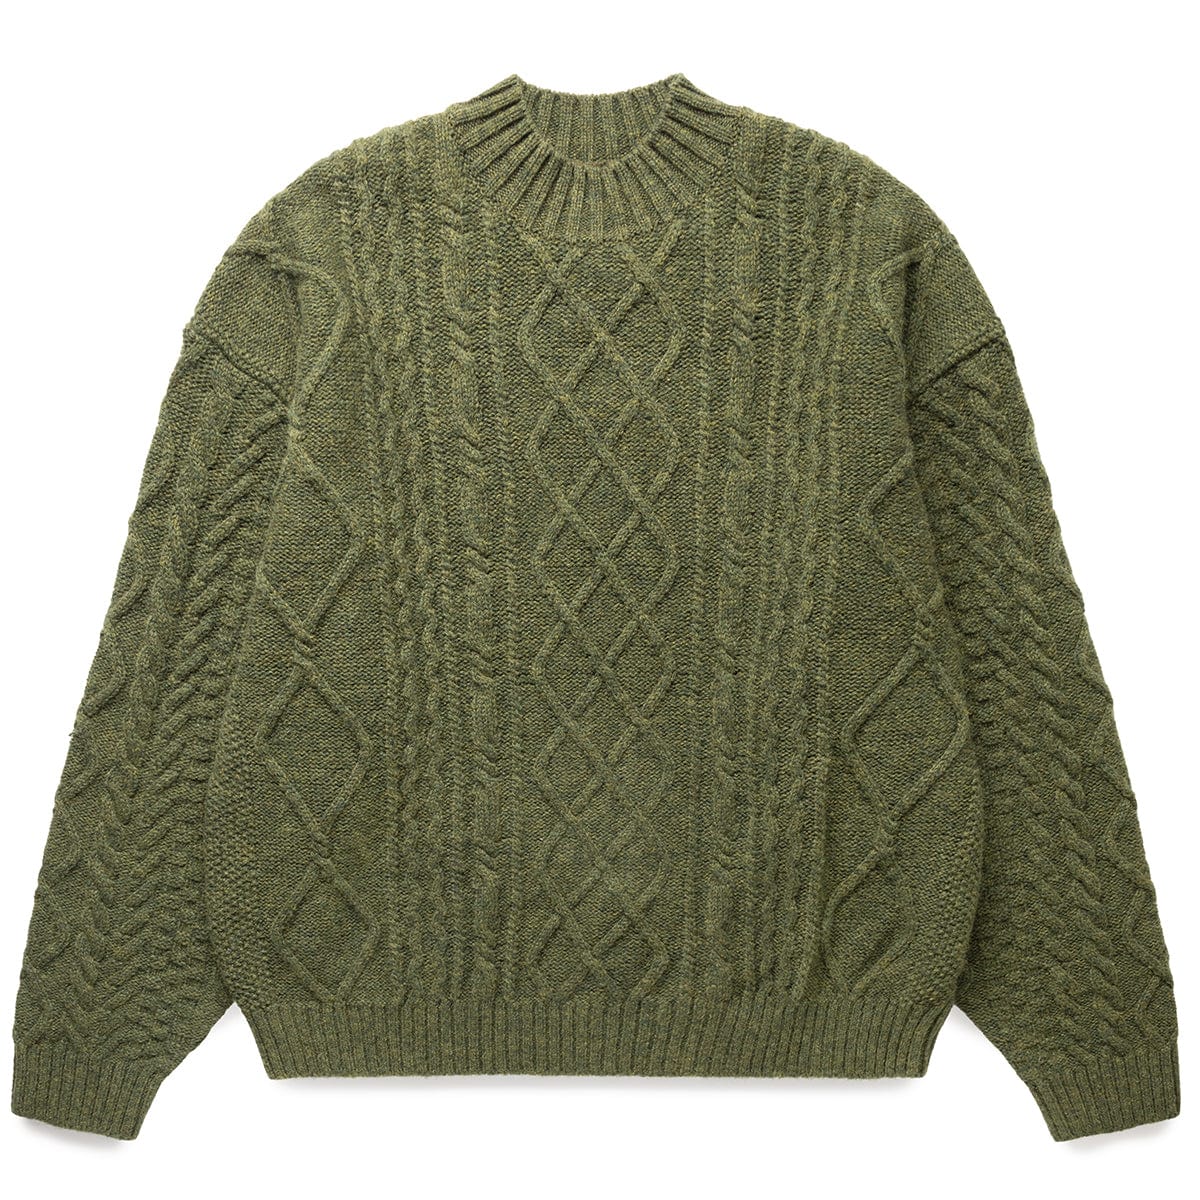 Kapital Knitwear 5G WOOL CABLE KNIT ELBOW-CATPITAL SWEATER